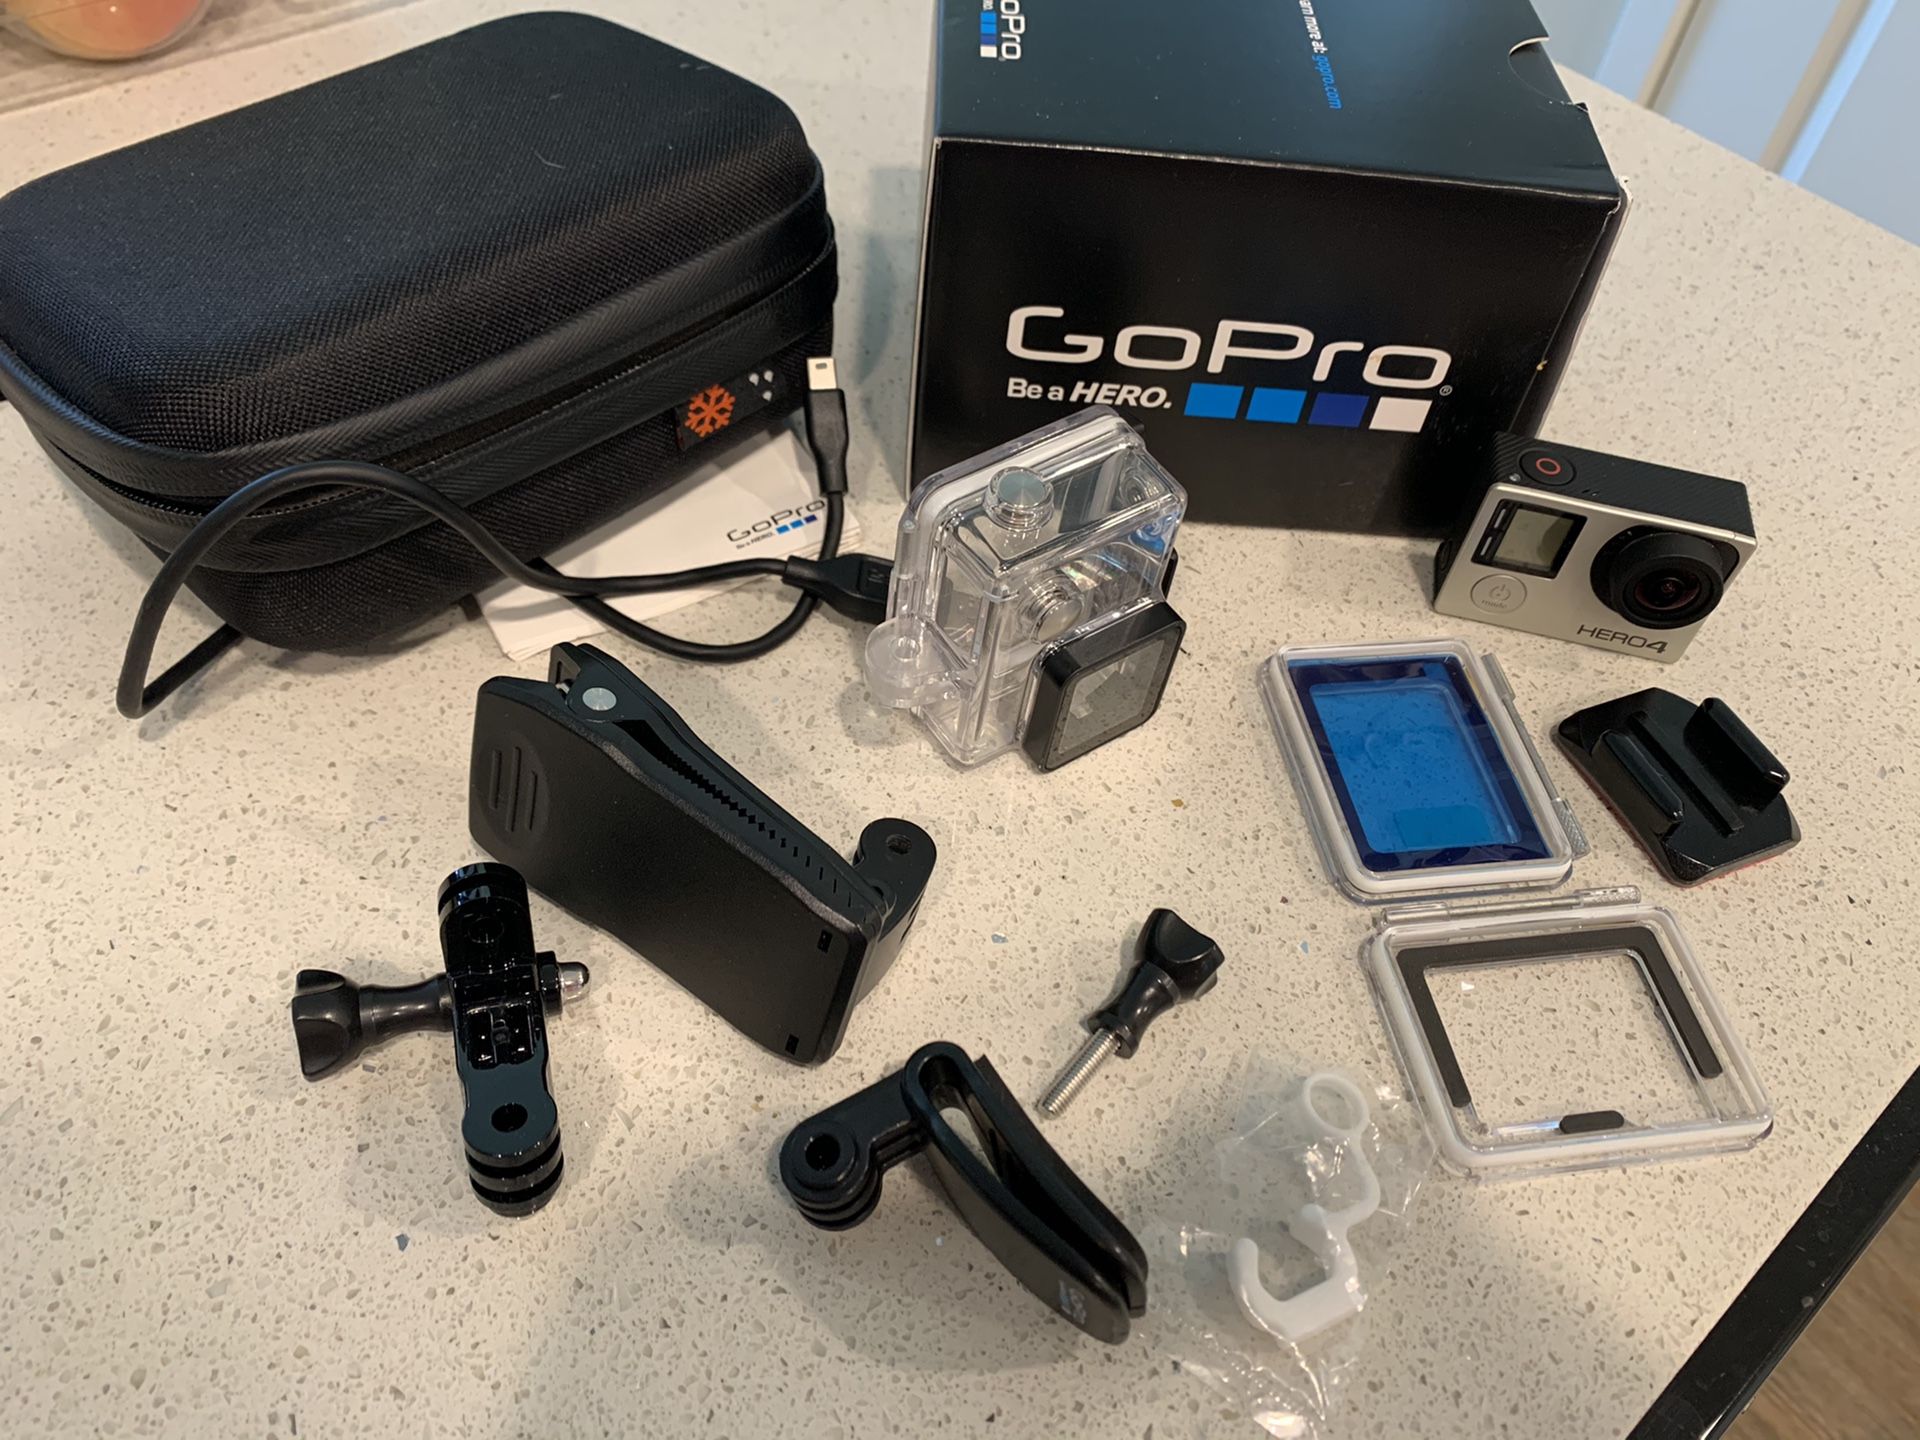 GoPro 4 Hero Silver and Accessories